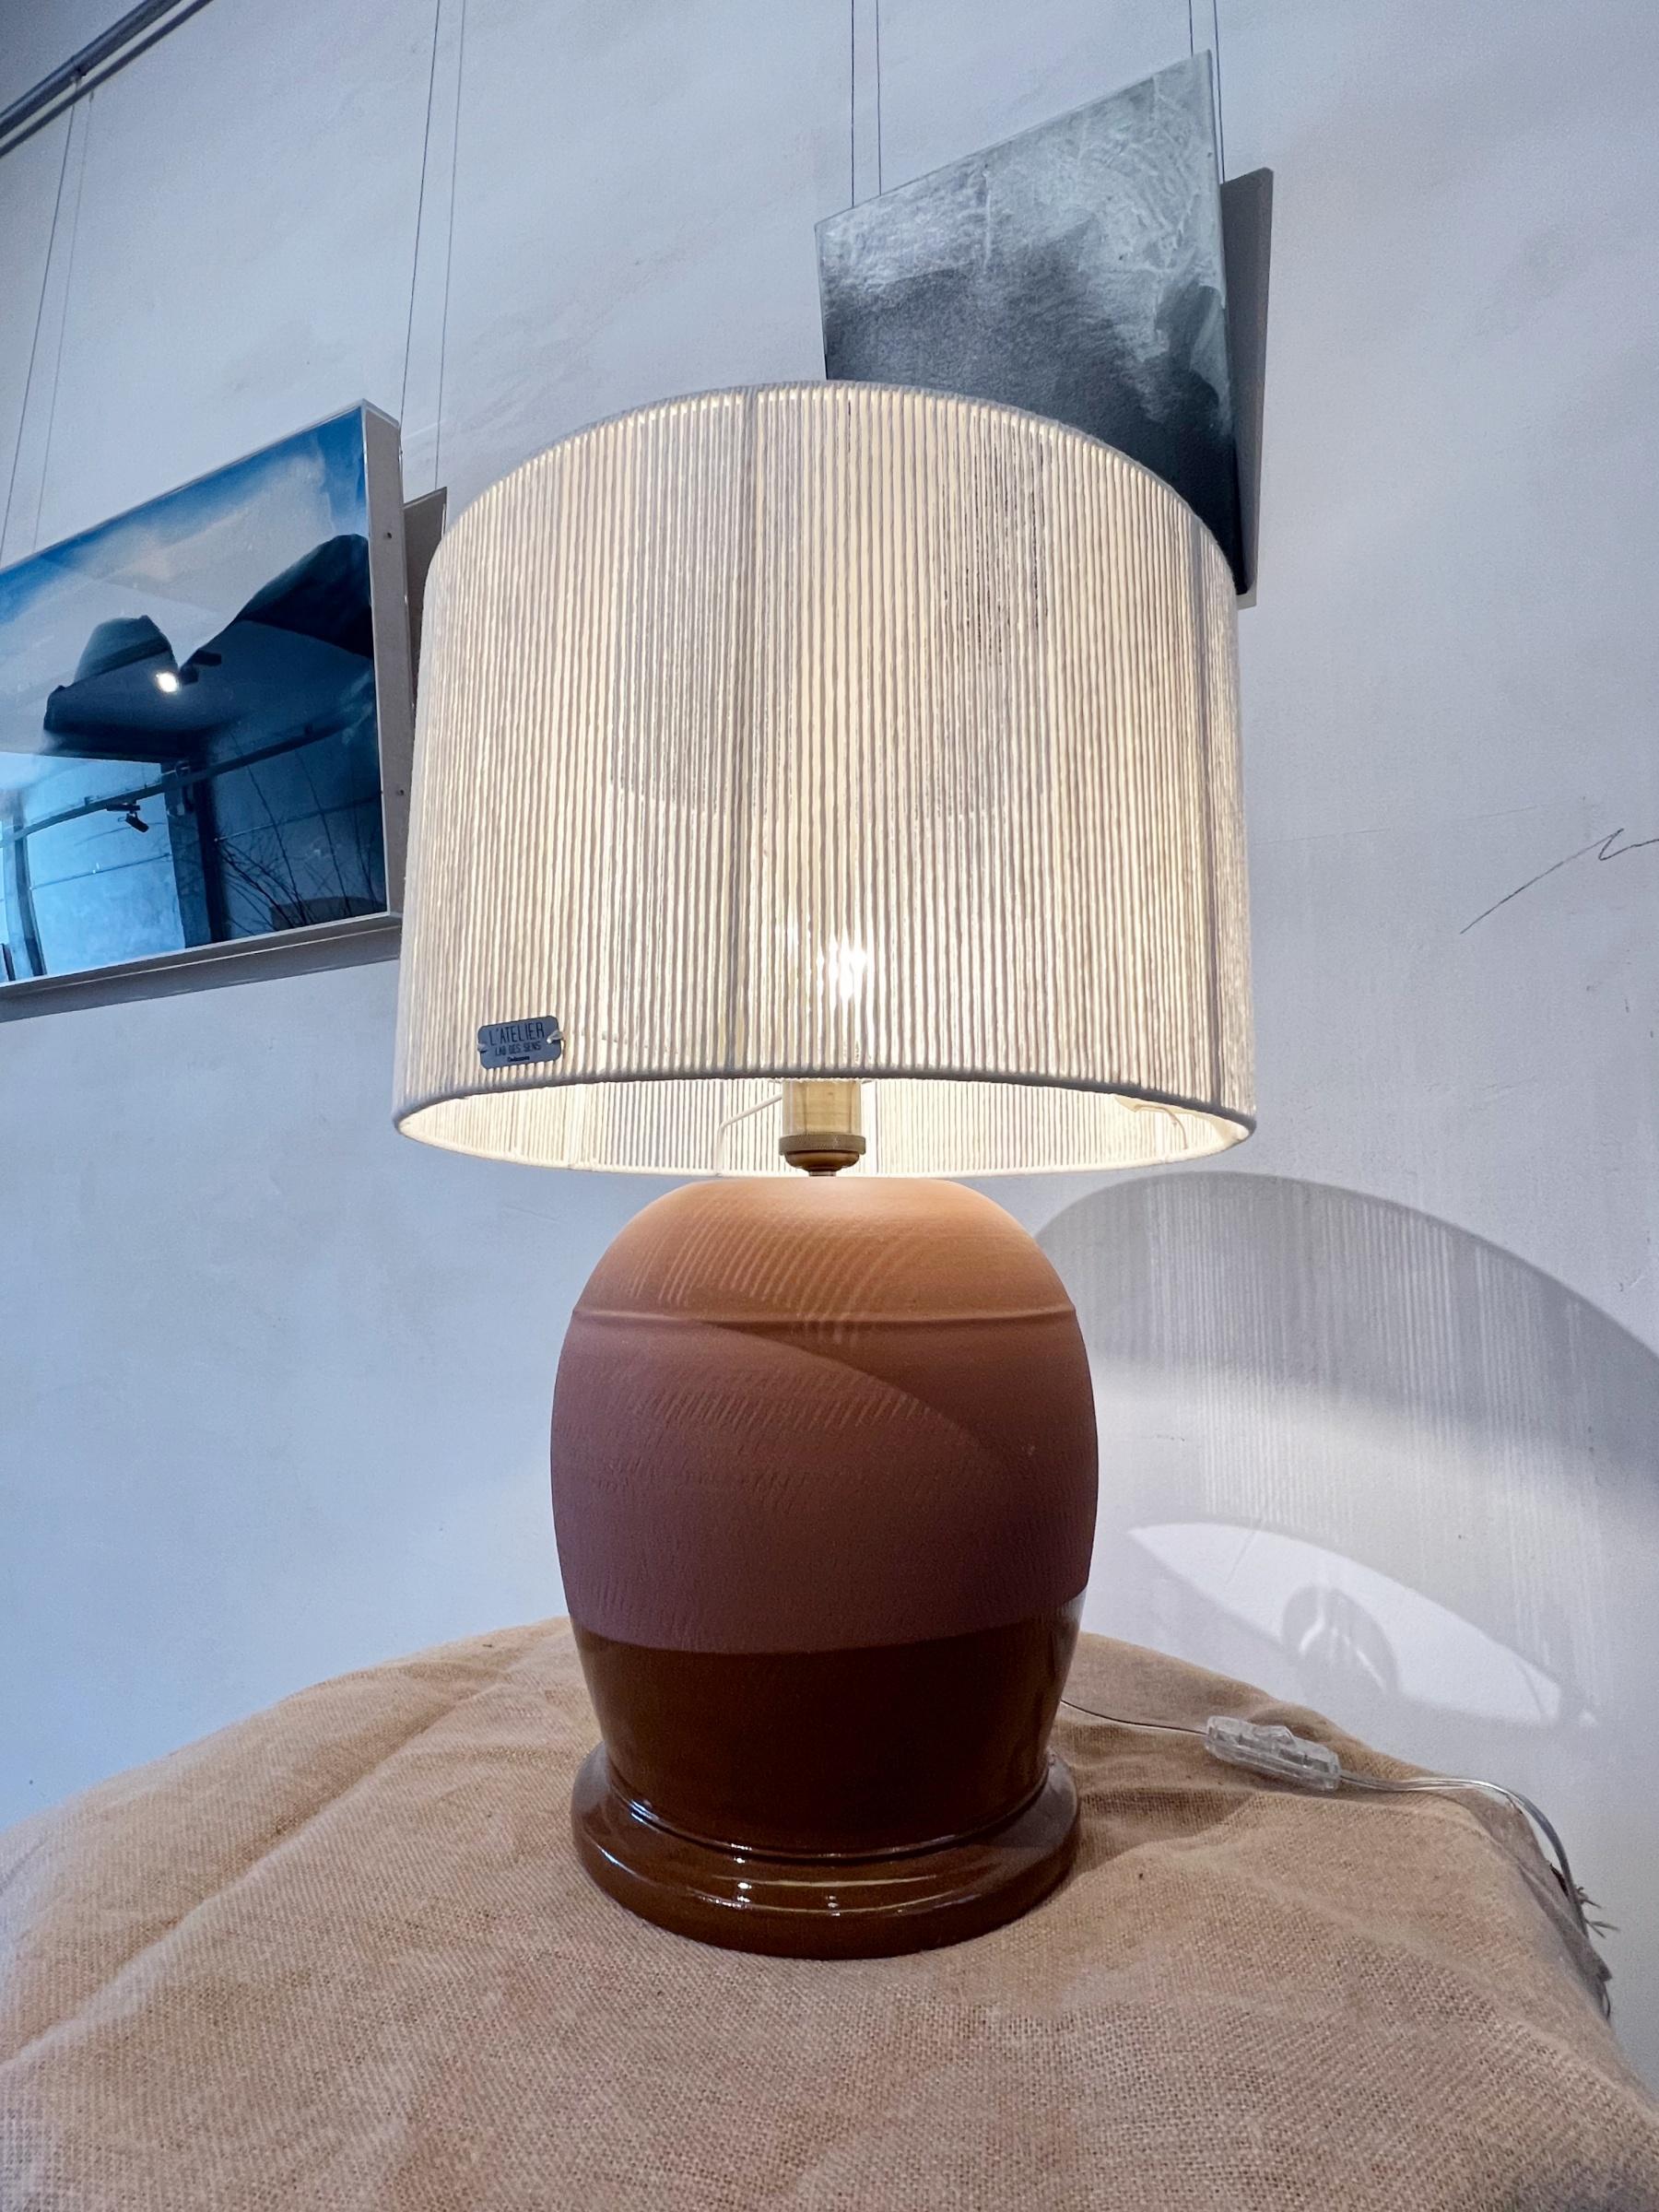 Handmade ceramic table lamp, designed by the artisan Rulo and the artist Manolo Eirin. All the pieces are signed and numbered, and accompanied by their certificate. 

The measurements of the lamp without shade are 37 cm (height) x 25 cm